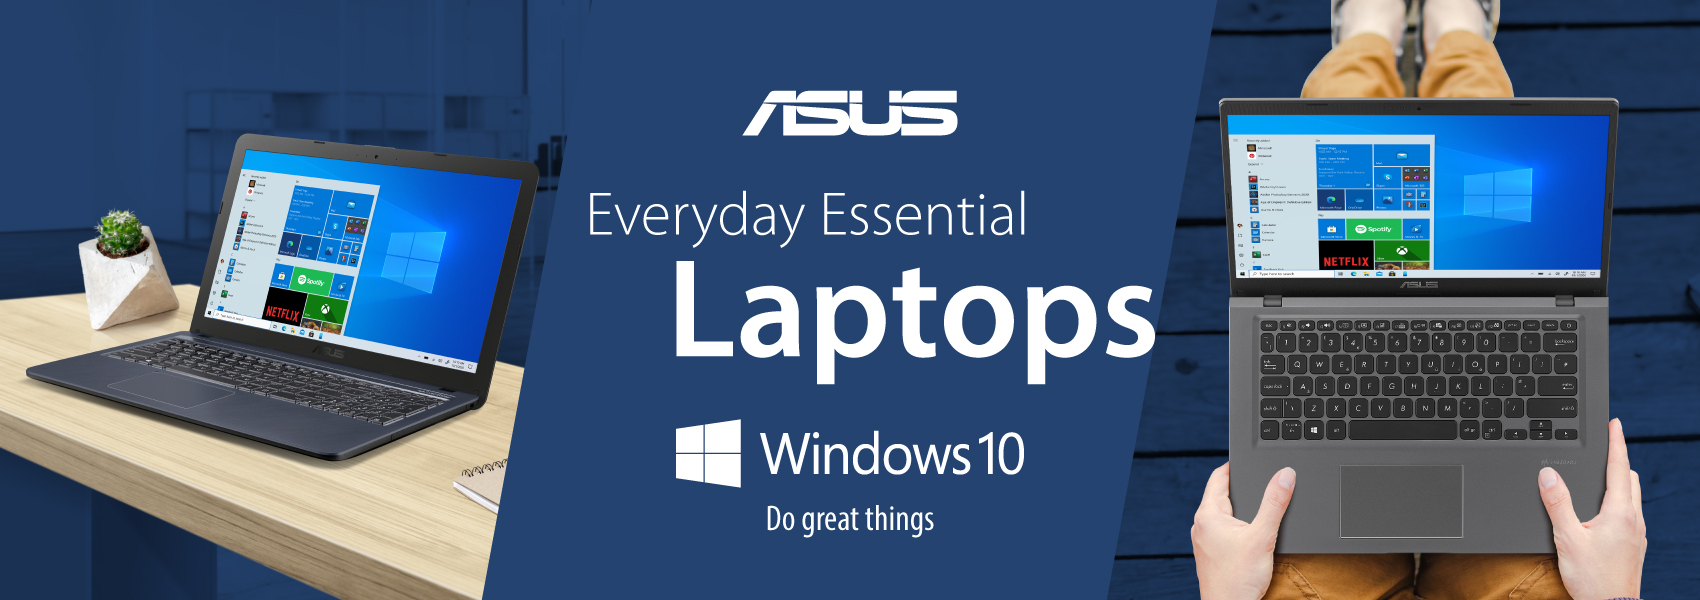 ASUS-PC-Works-Web-Banners_1700x600px_Everyday-Essentials.jpg